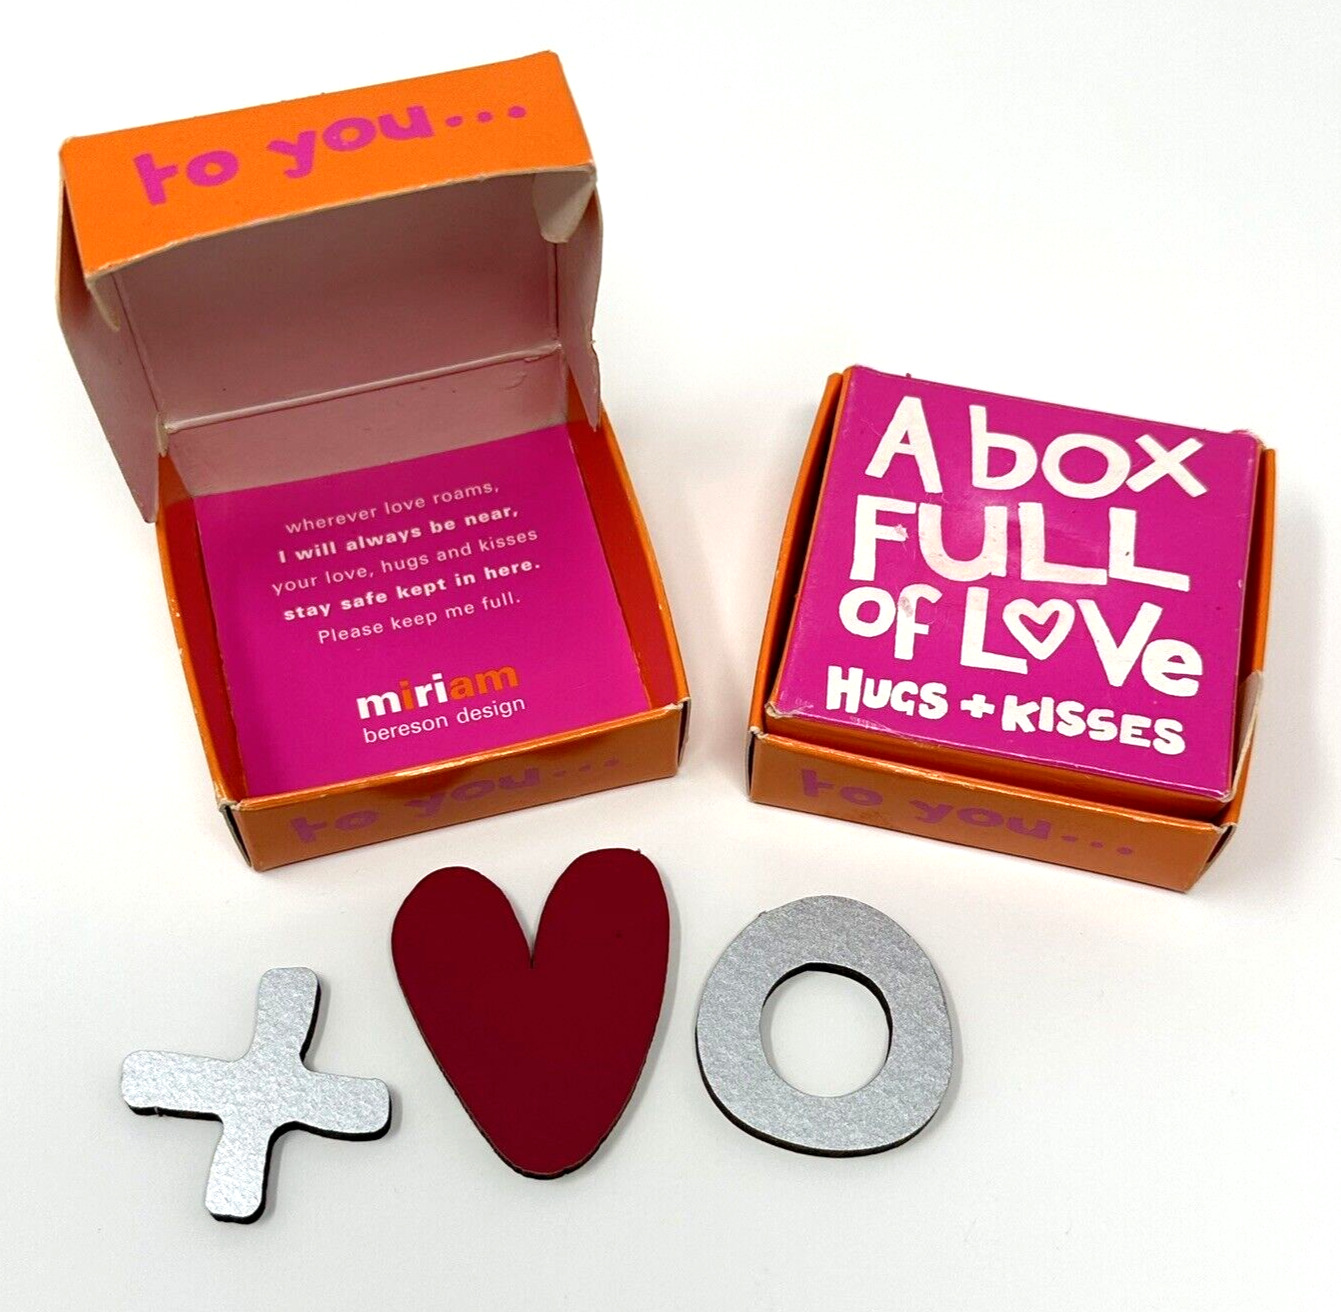 2 Starbucks Coffee A Box Full Love Valentine To From Gifts 156120 Wood X O Heart